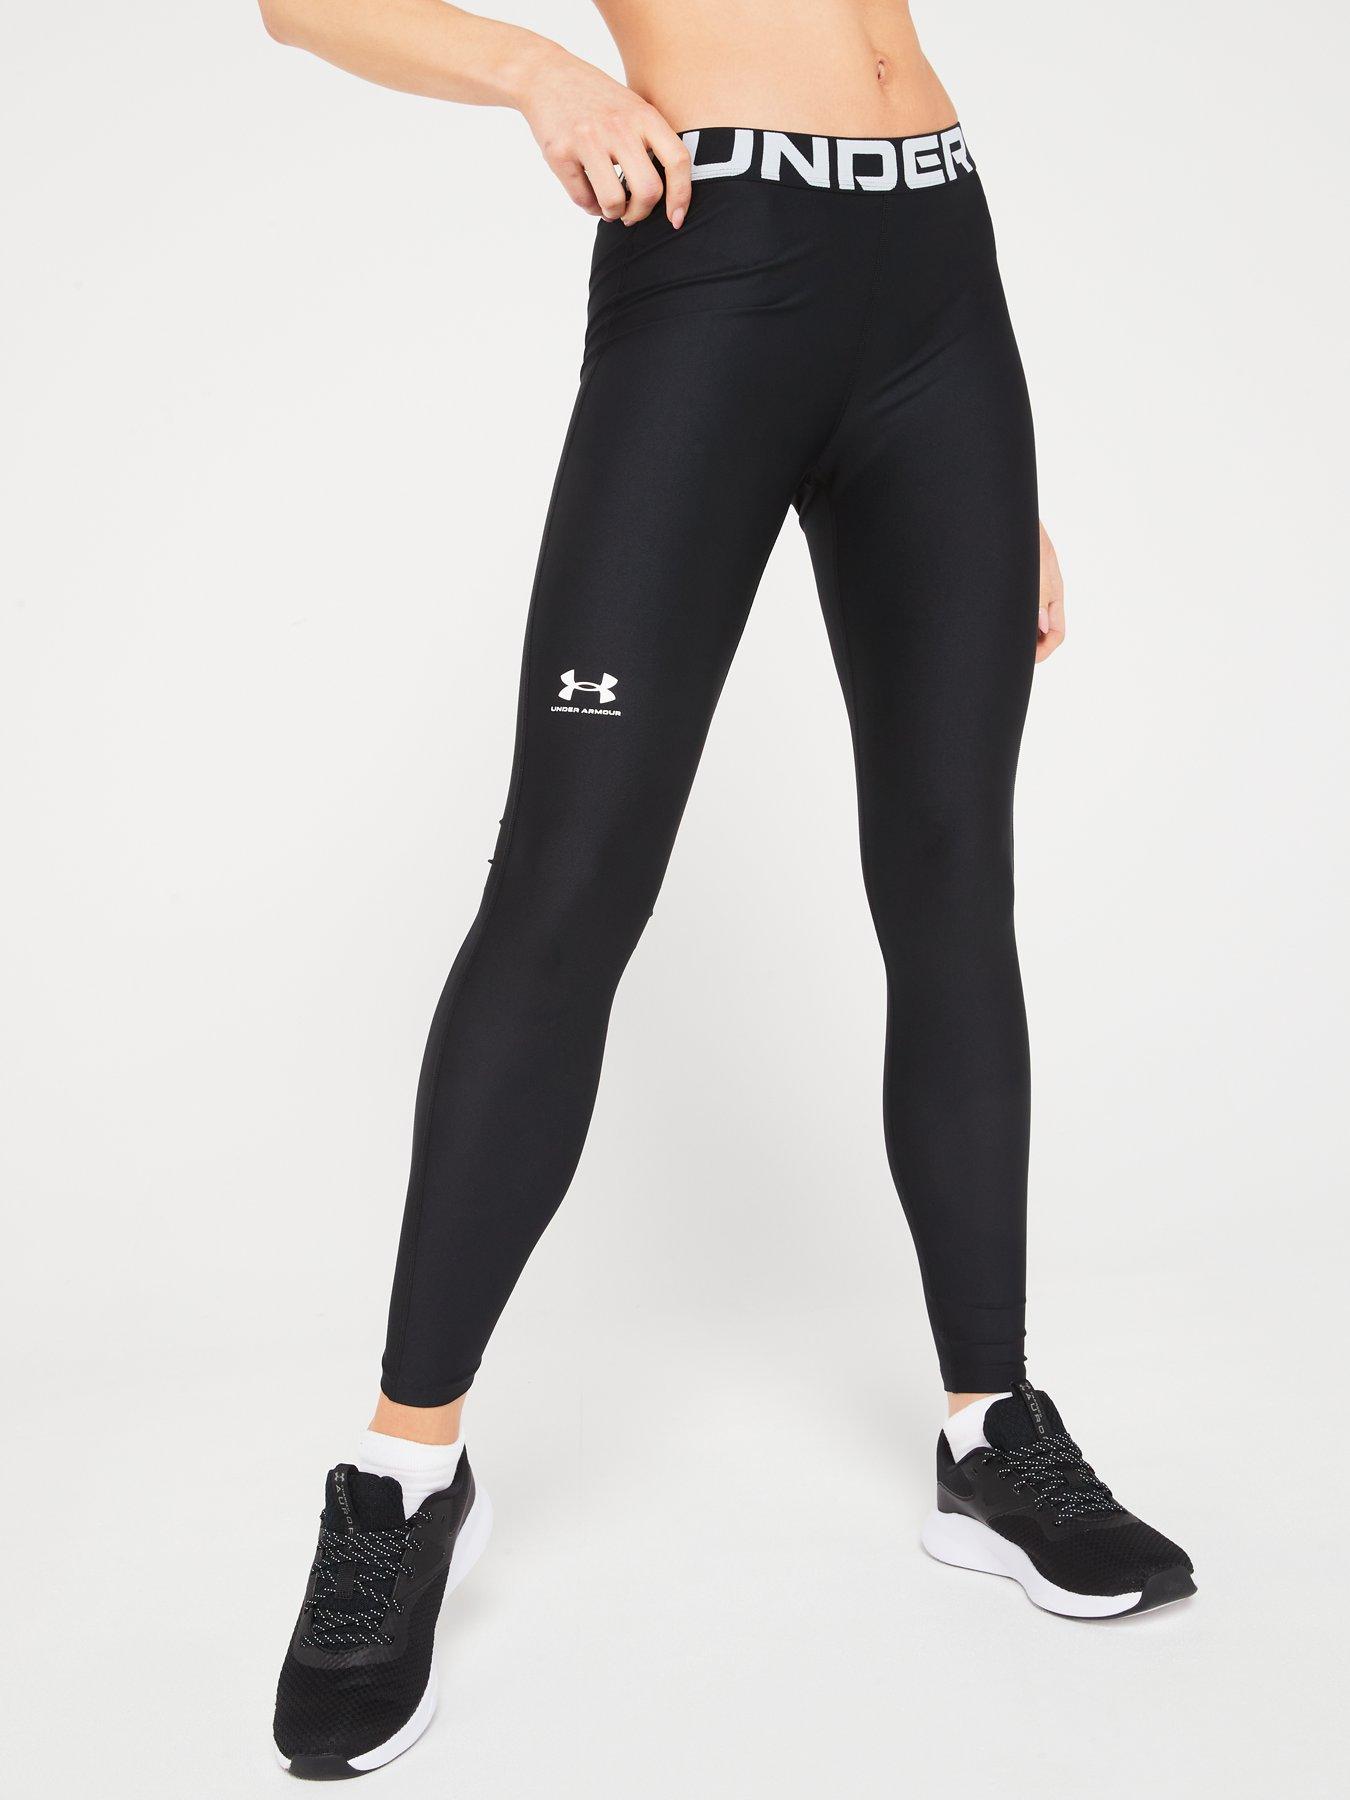 UNDER ARMOUR Compression Hi-Rise Black/Abstract Ankle Leggings